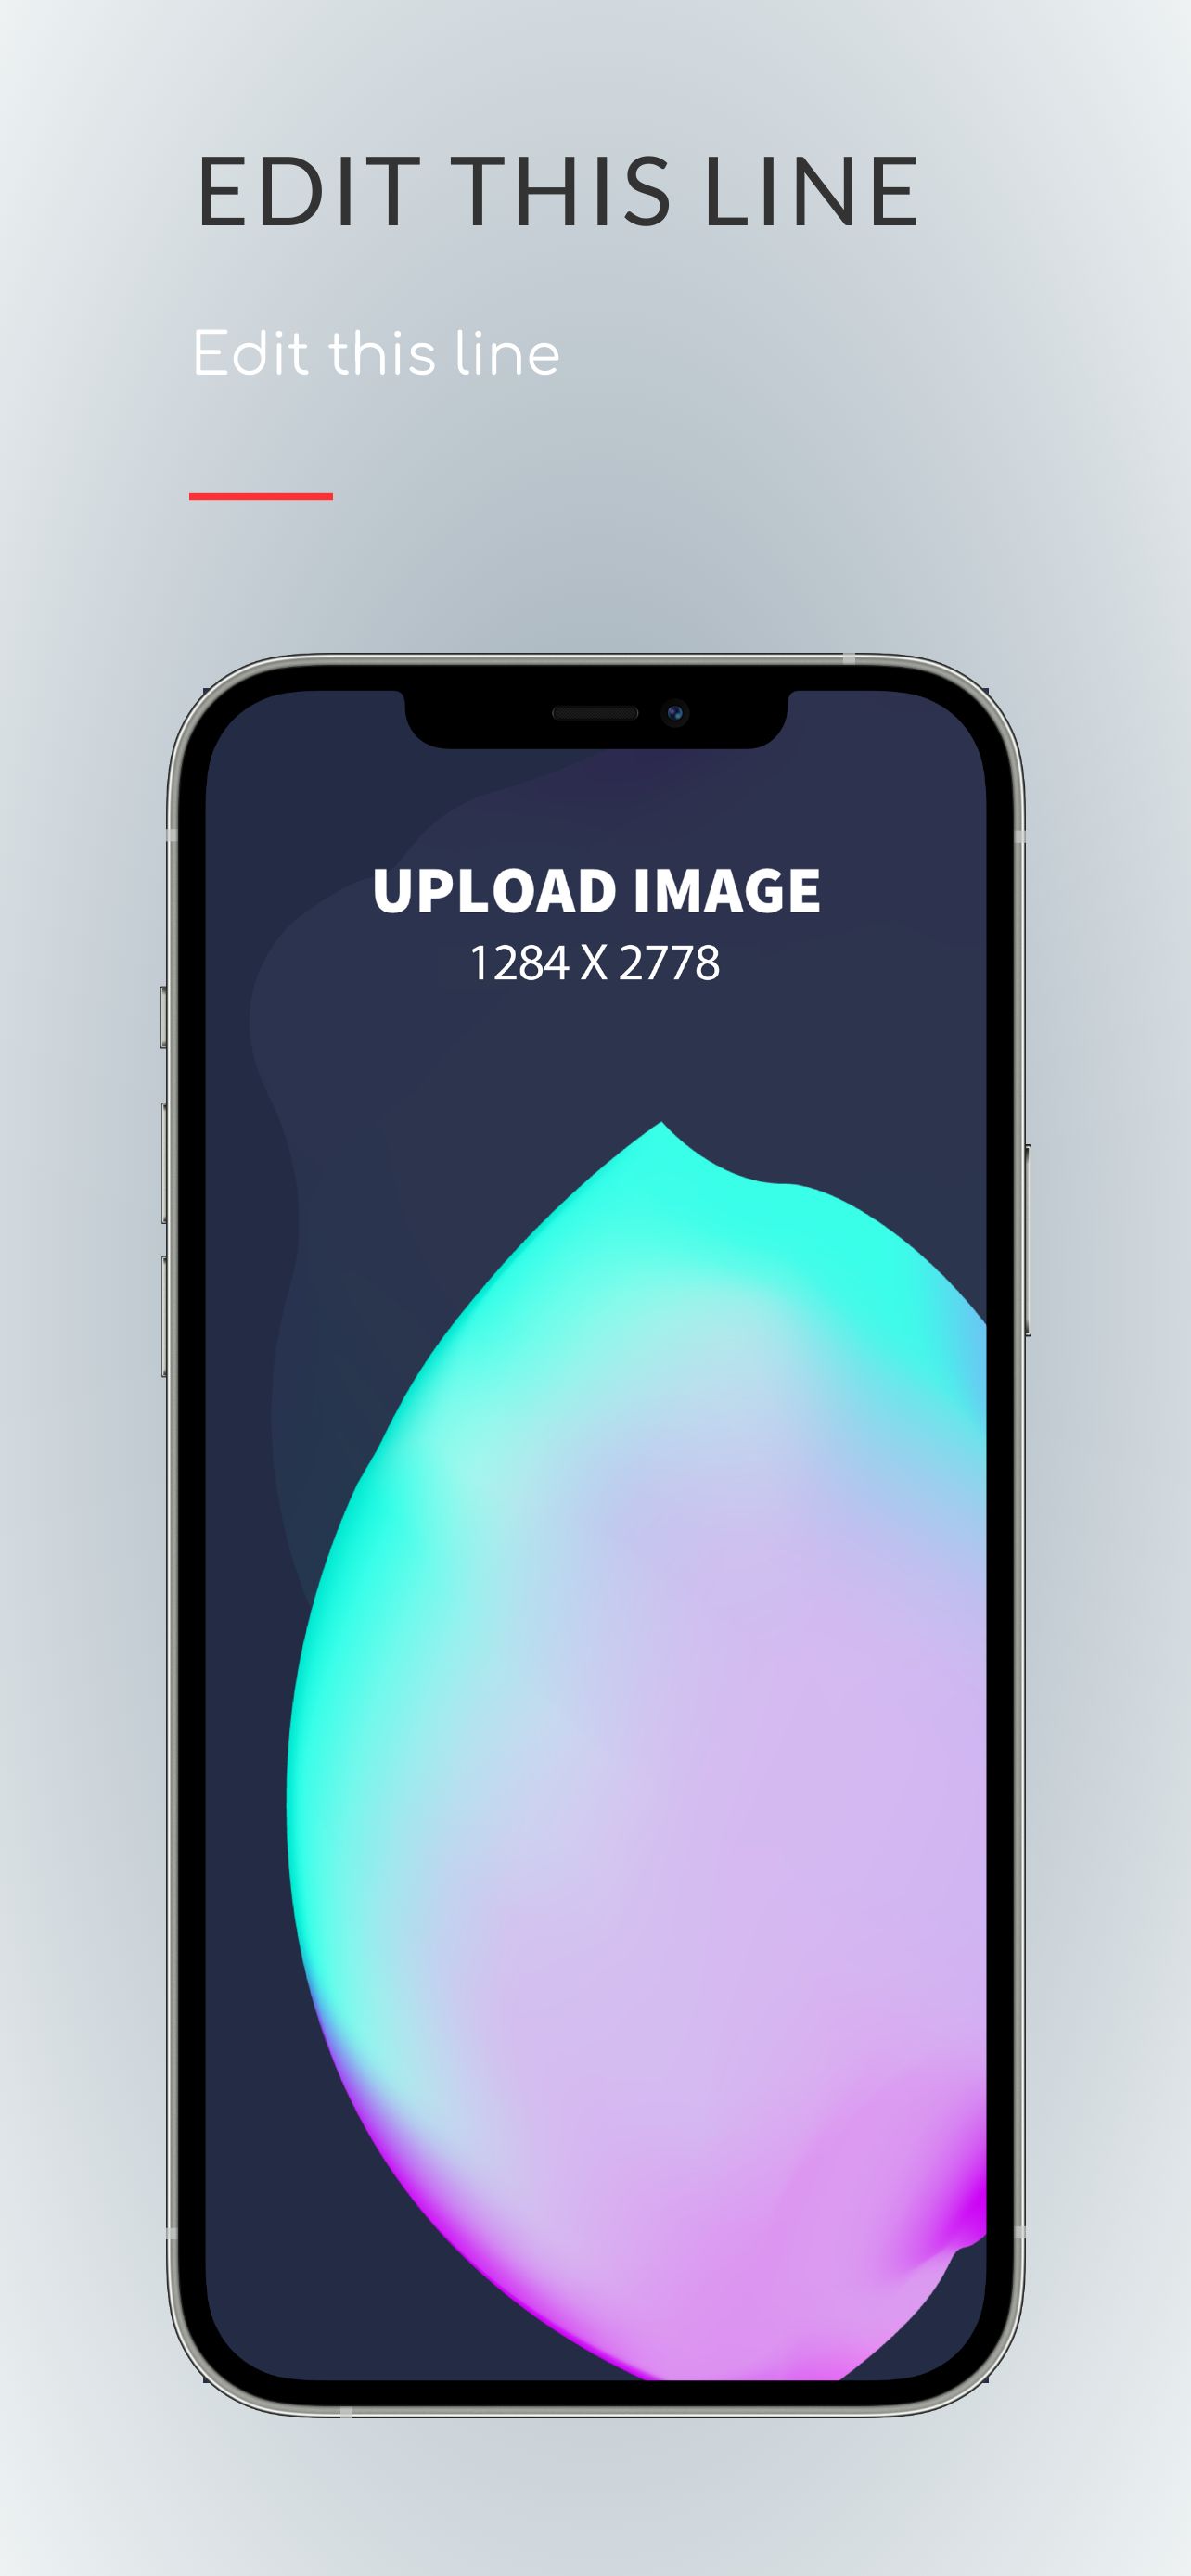 iPhone 12 Pro Max Screenshot 5 template. Quickly edit fonts, text, colors, and more for free.